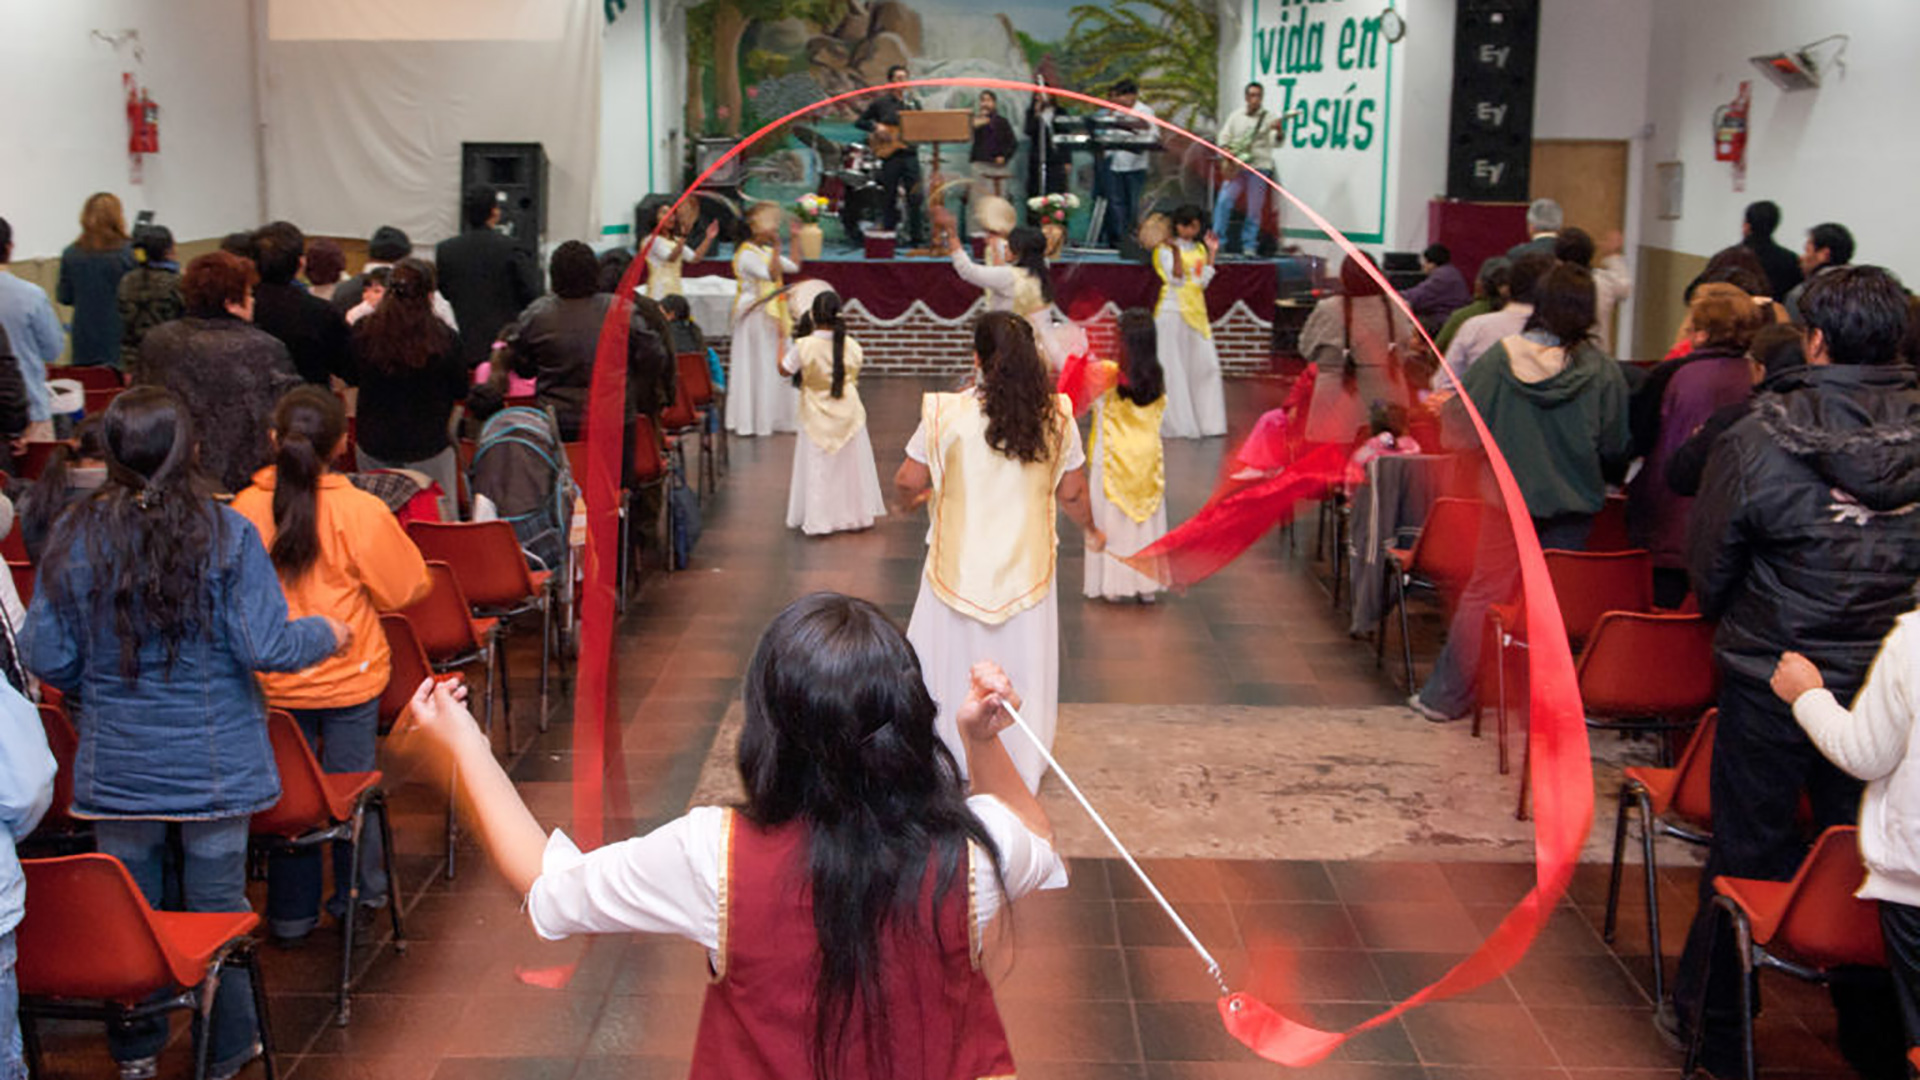 Bolivian immigrants worship at a Baptist church in Argentina